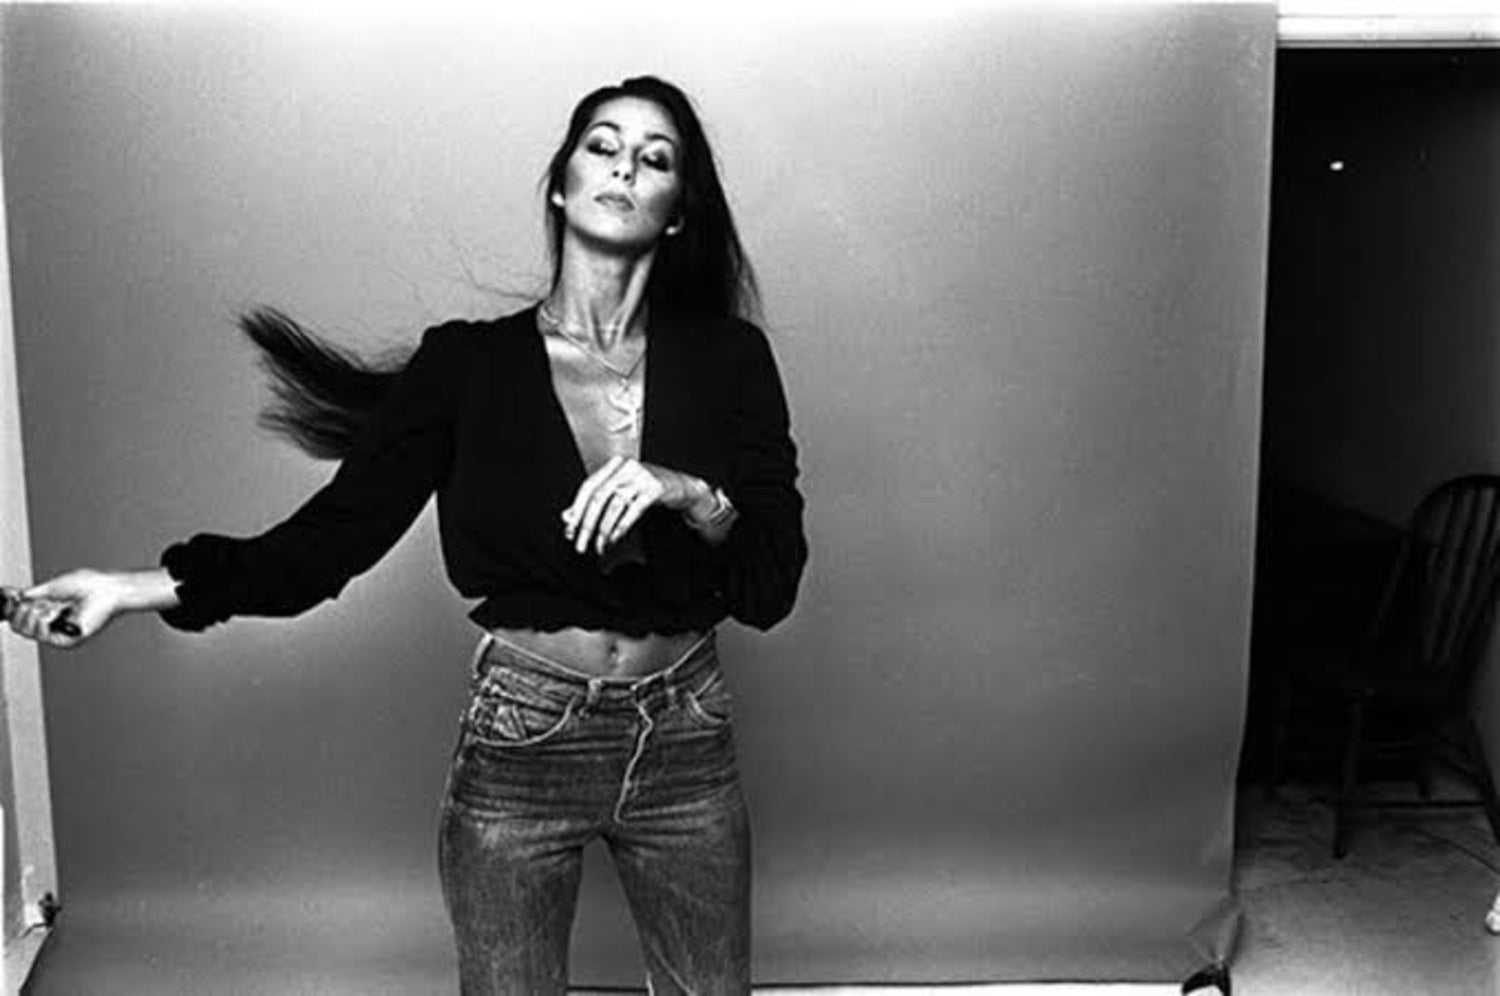 Cher, Los Angeles, 1973, "Cher with Hairbrush" Edition of 50 by Norman Seeff